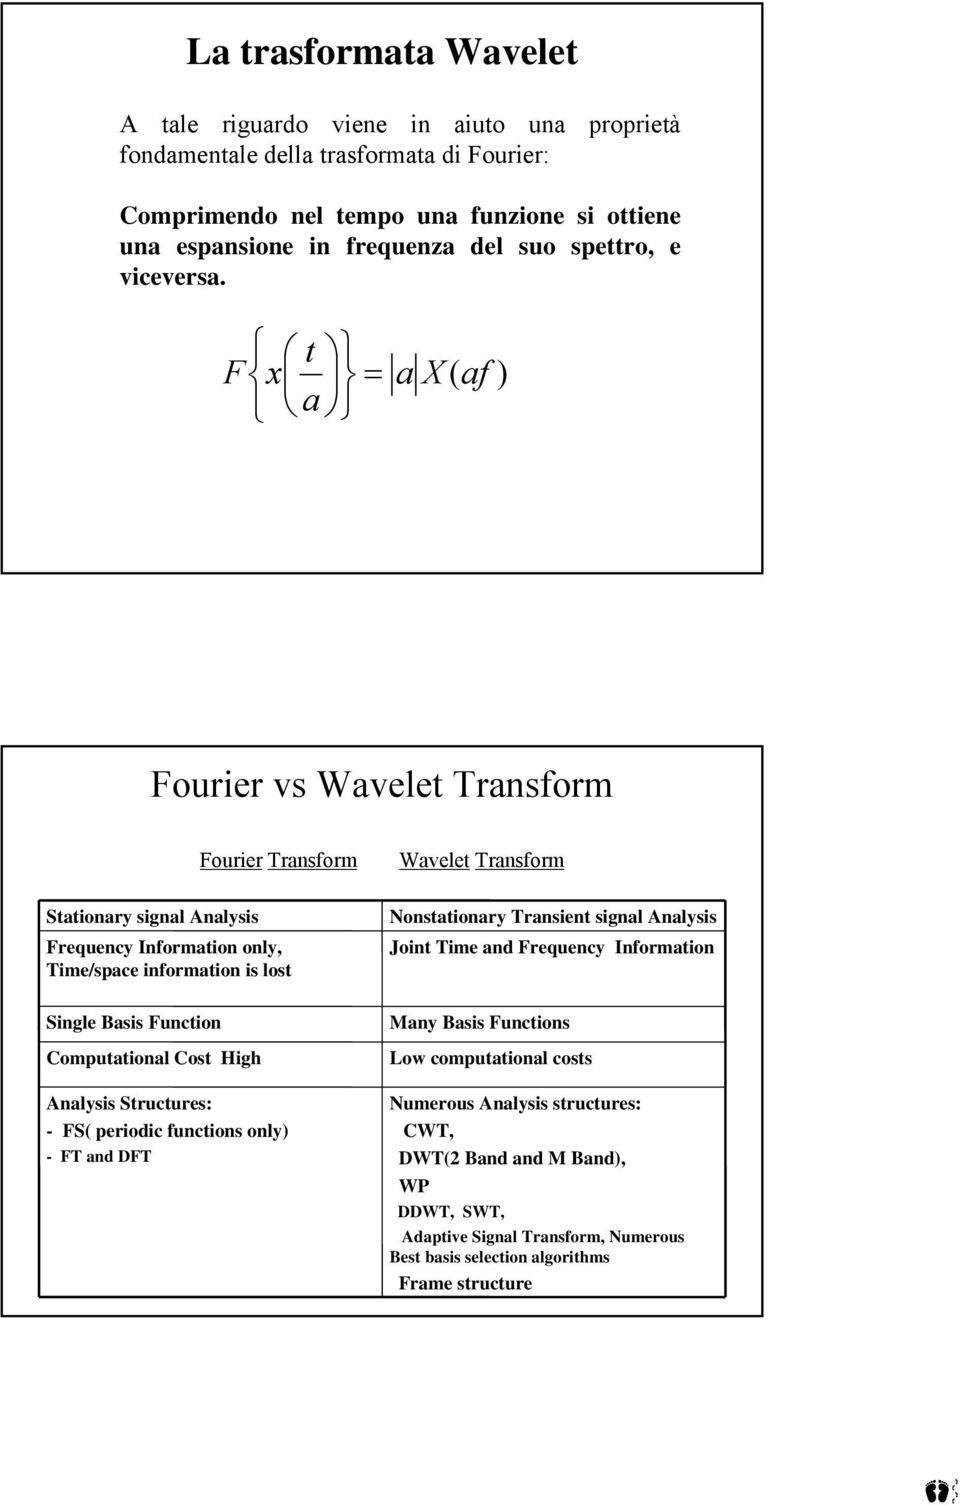 F x t a = a X (af ) Fourier vs Wavelet Transform Stationary signal Analysis Fourier Transform Frequency Information only, Time/space information is lost Single Basis Function Computational Cost